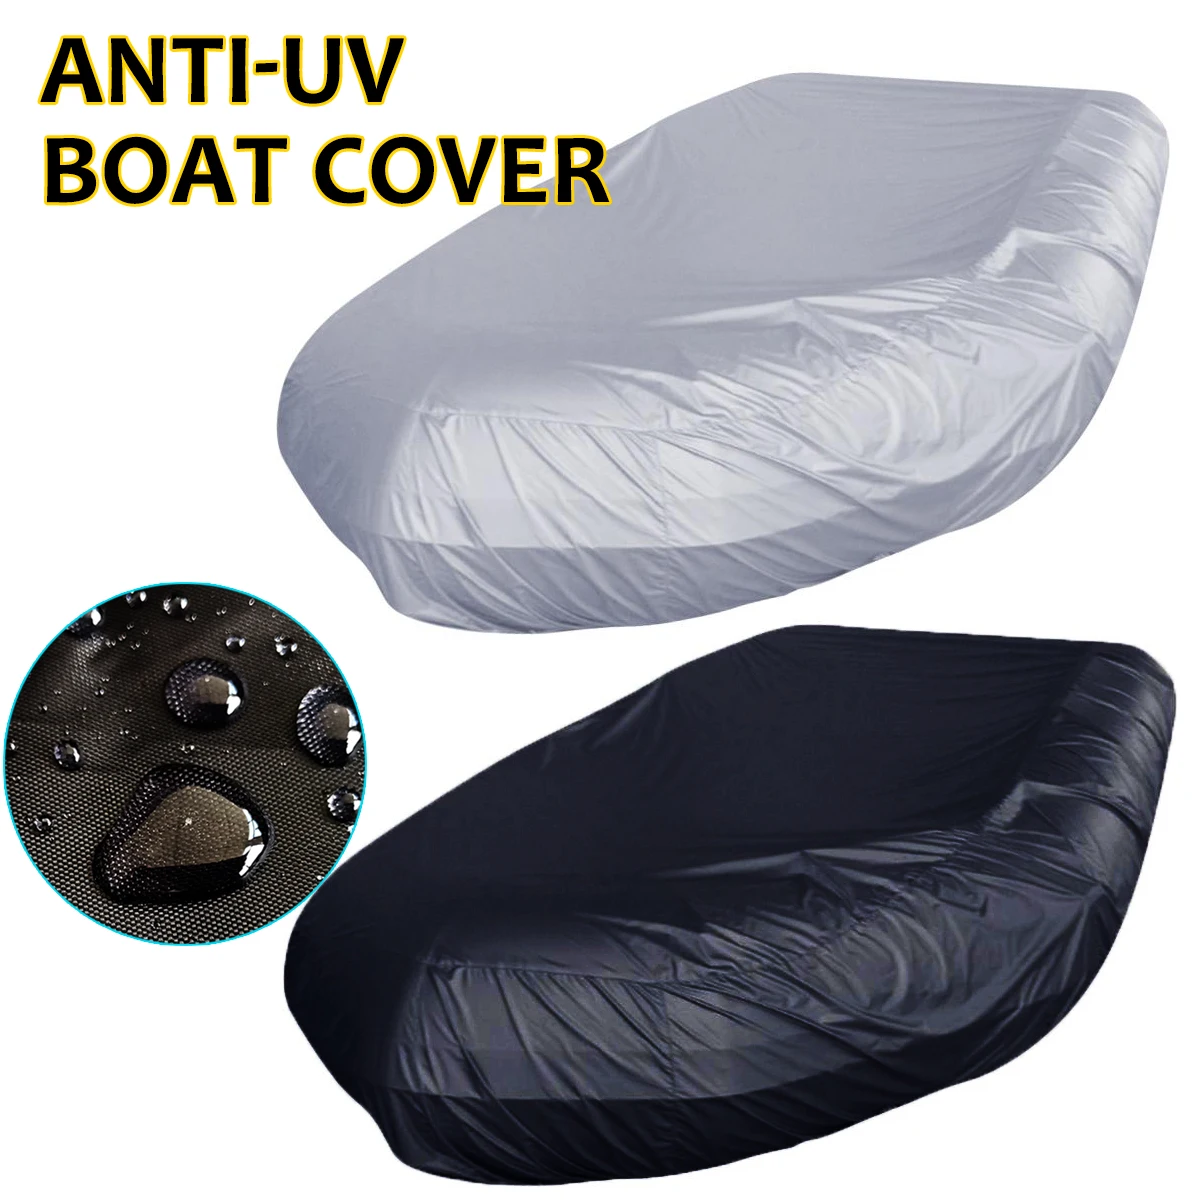 Kayak Protector Cover Waterproof Dustproof Boat Cover Canoe Boat Anti-UV Inflatable Dinghy Fishing Boat Shade Heavy Duty